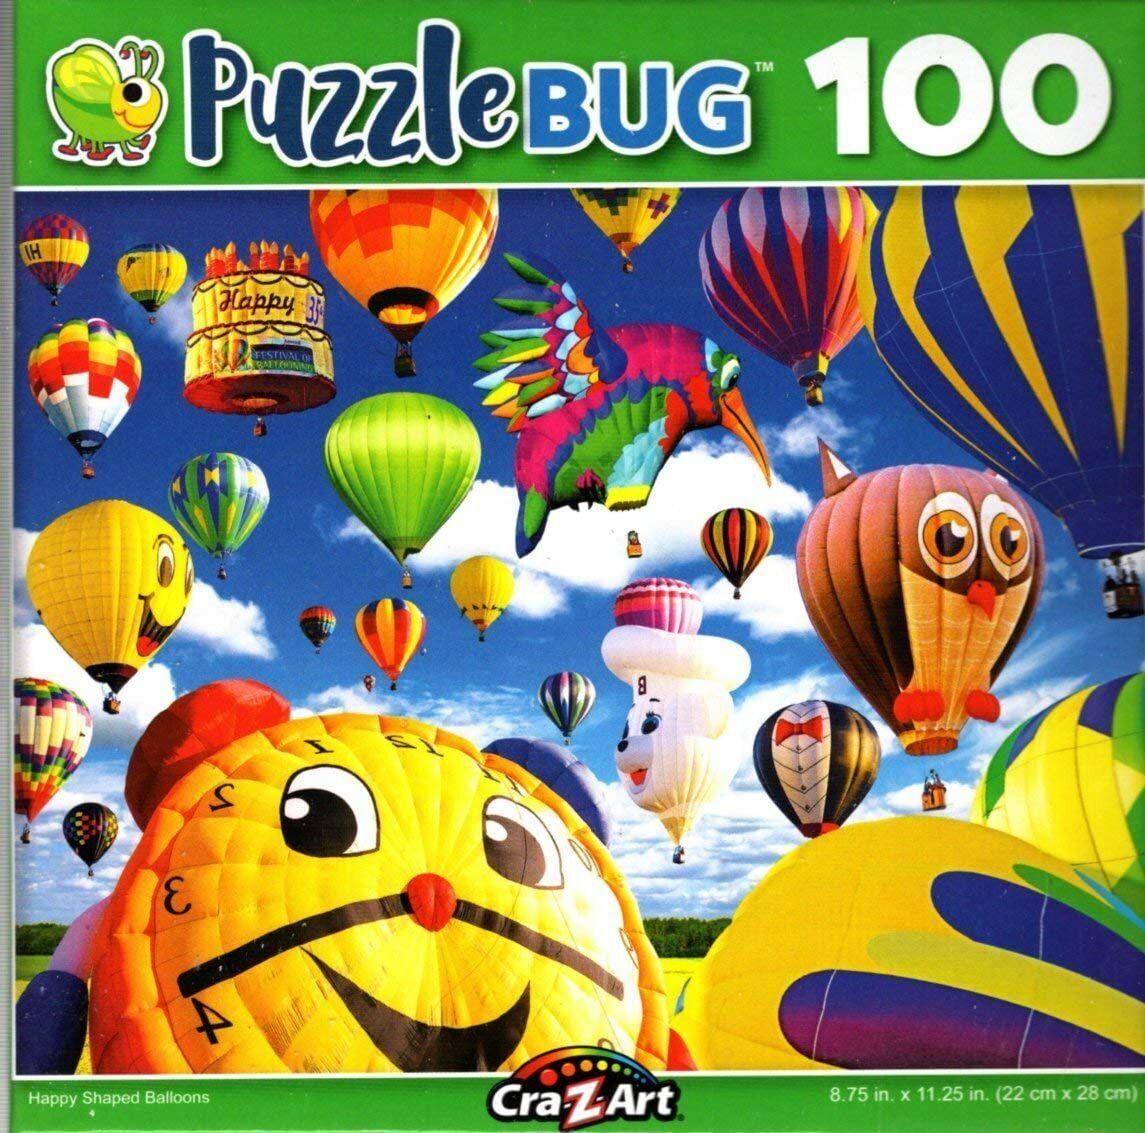 Happy Shaped Balloons - 100 Pieces Jigsaw Puzzle